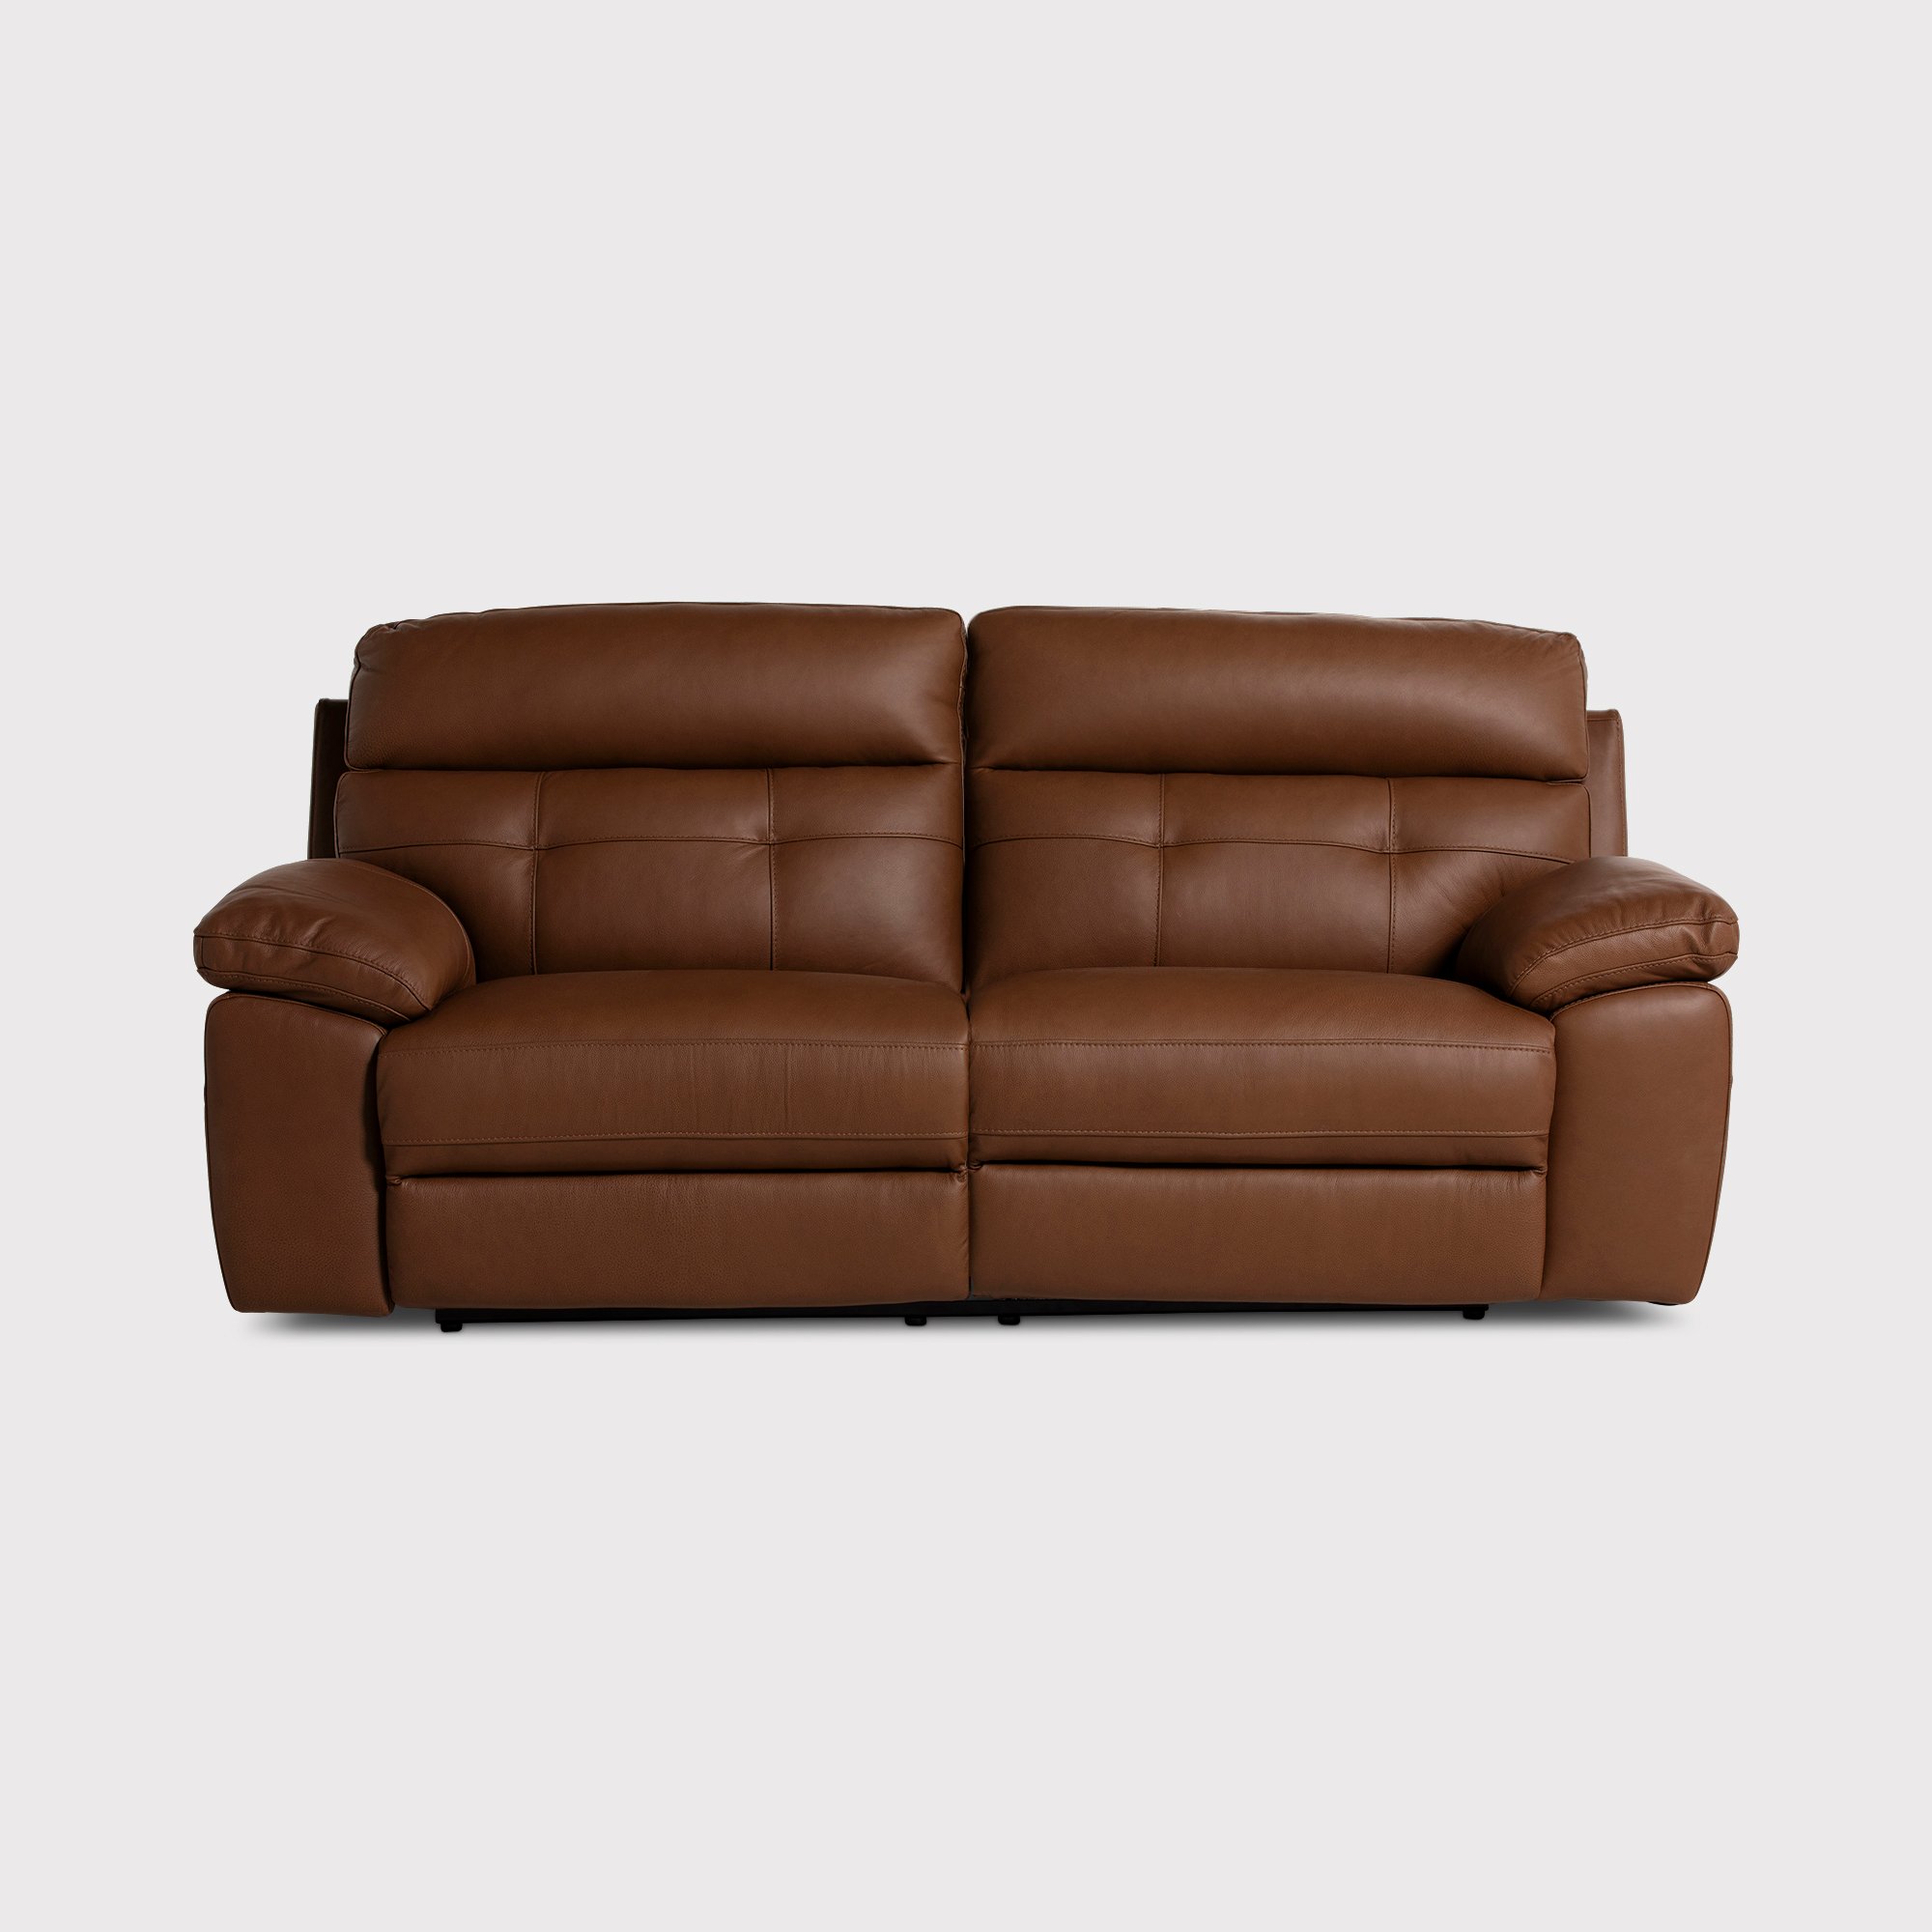 Holborn 3 Seater Power Recliner Recliner Sofa, Brown Leather | Barker & Stonehouse